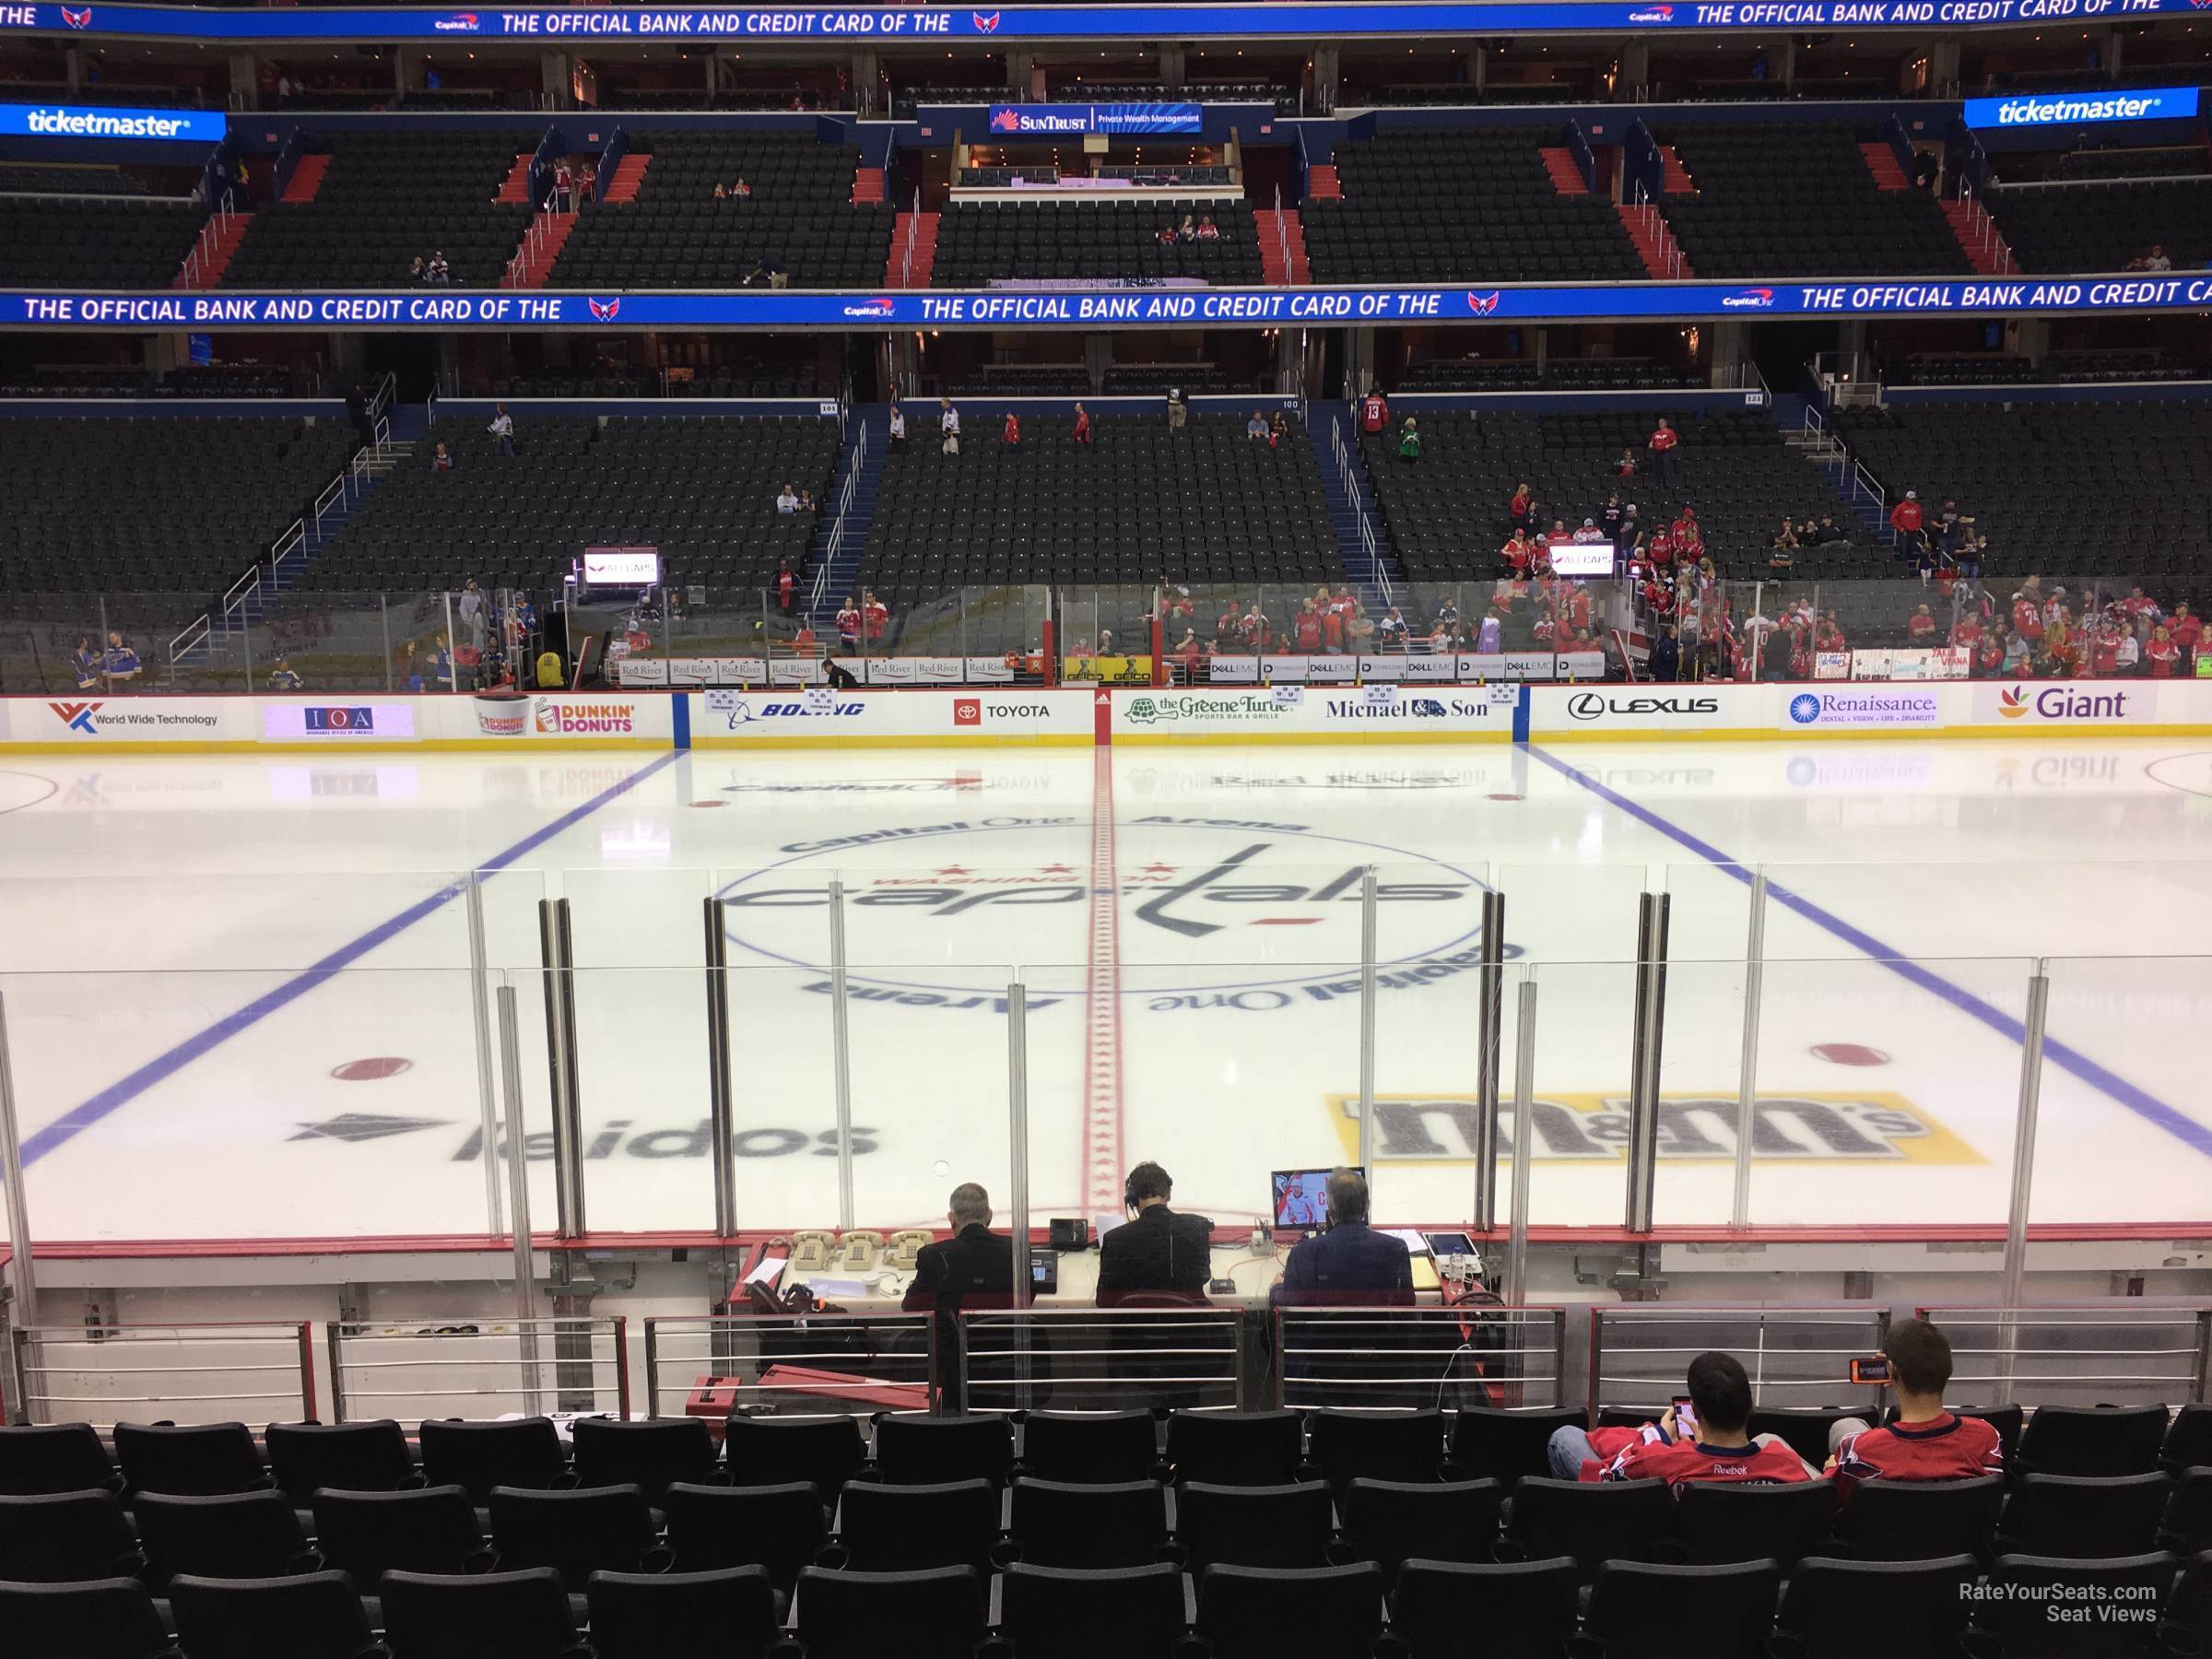 section 111, row l seat view  for hockey - capital one arena